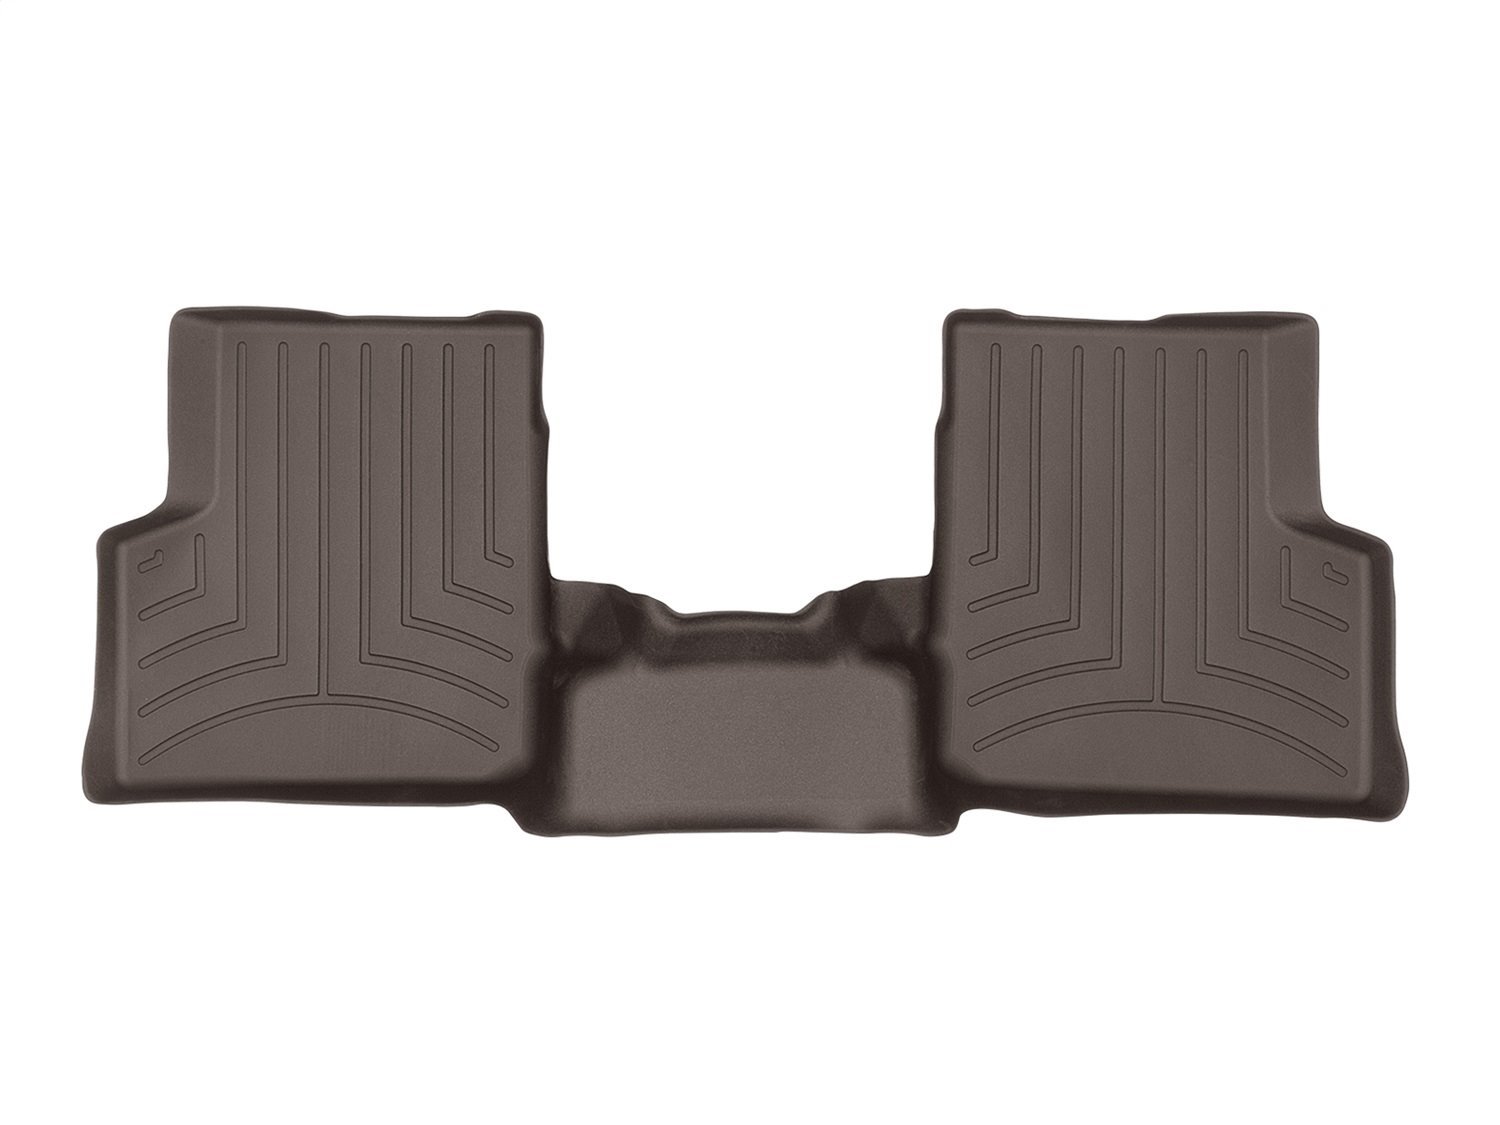 REAR FLOORLINER COCOA BUICK ENCLAVE 2011-2017 COVERS 2ND AND 3RD ROW FOOT AREAS WITH 2ND ROW CONSOLE